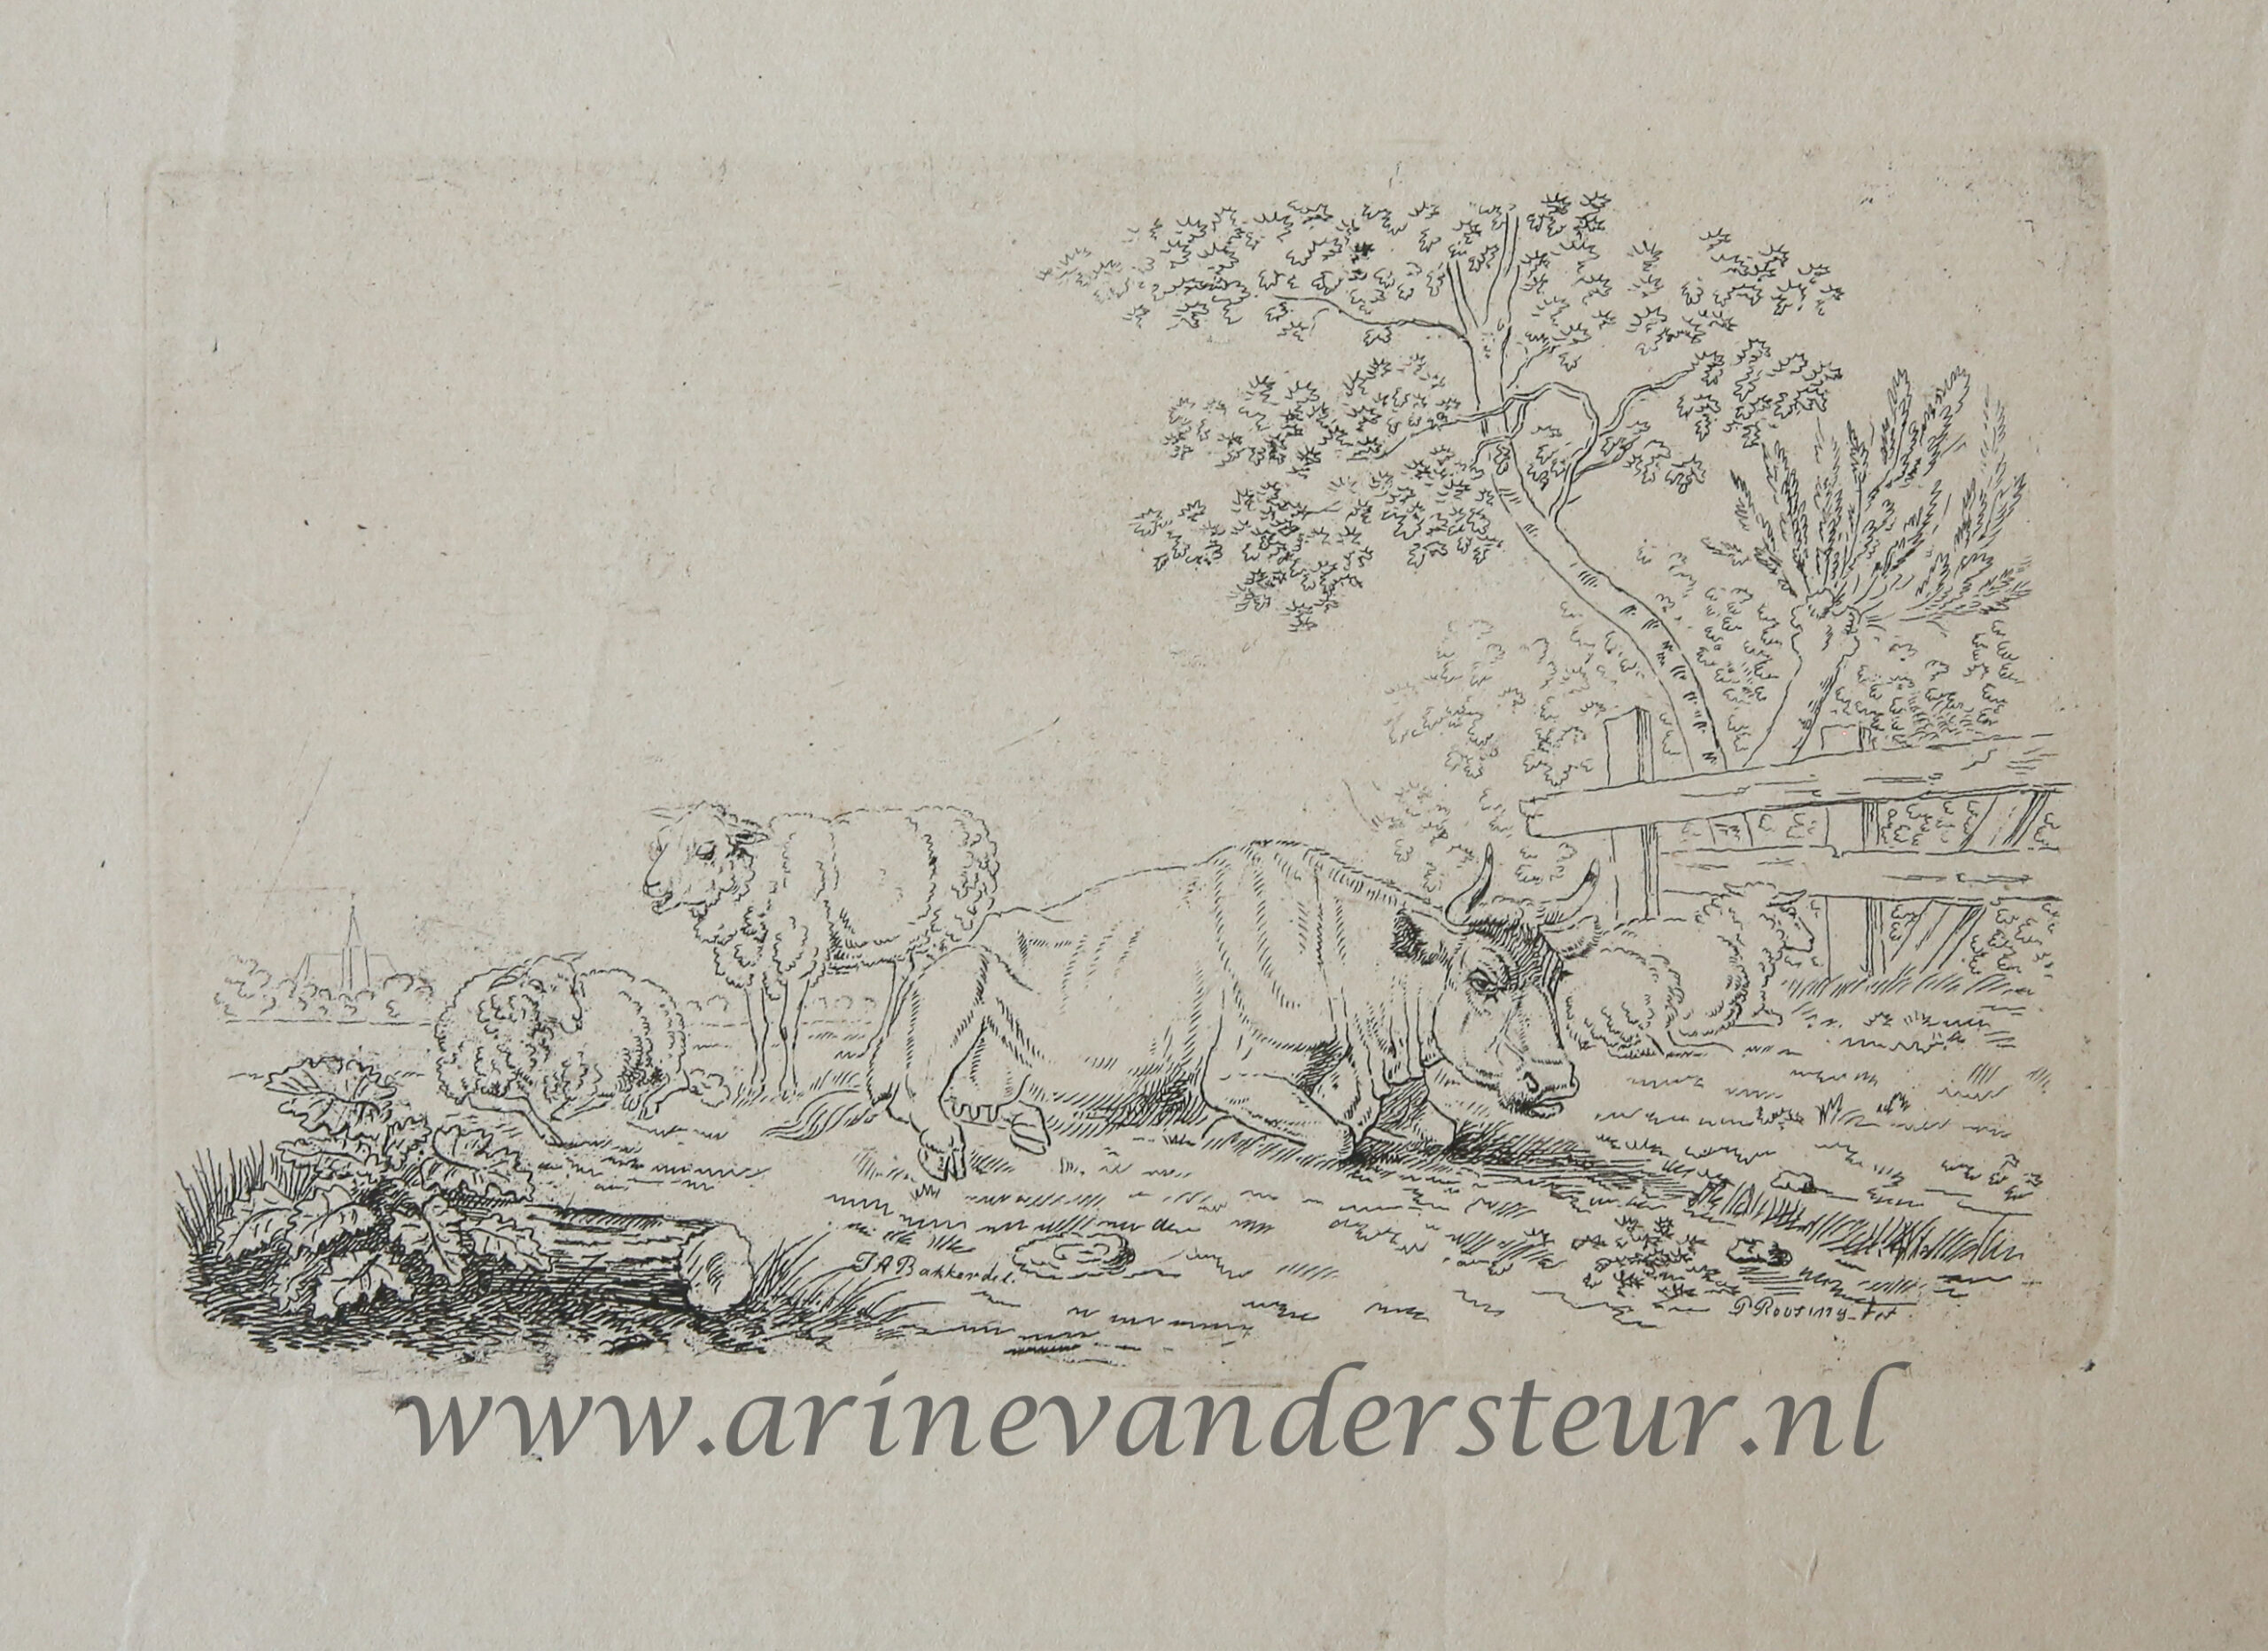 [Original etching, ets] P. Roosing after J. A. Bakker (1796-1876). Cattle in a meadow, published 1800-1850.